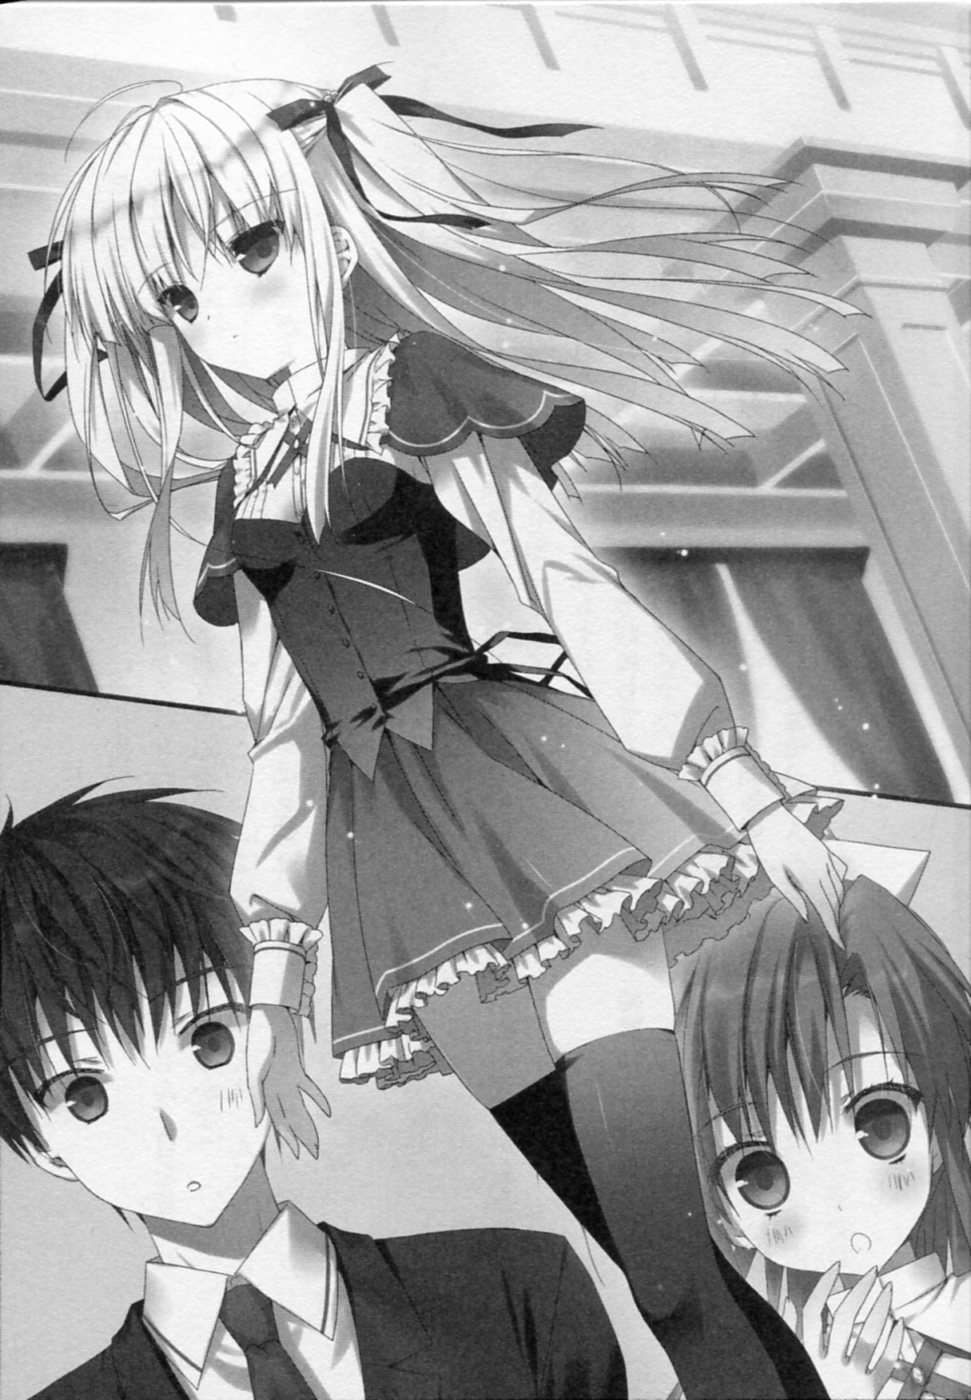 Absolute Duo: Absolute Duo Vol. 3 (Series #3) (Paperback) 